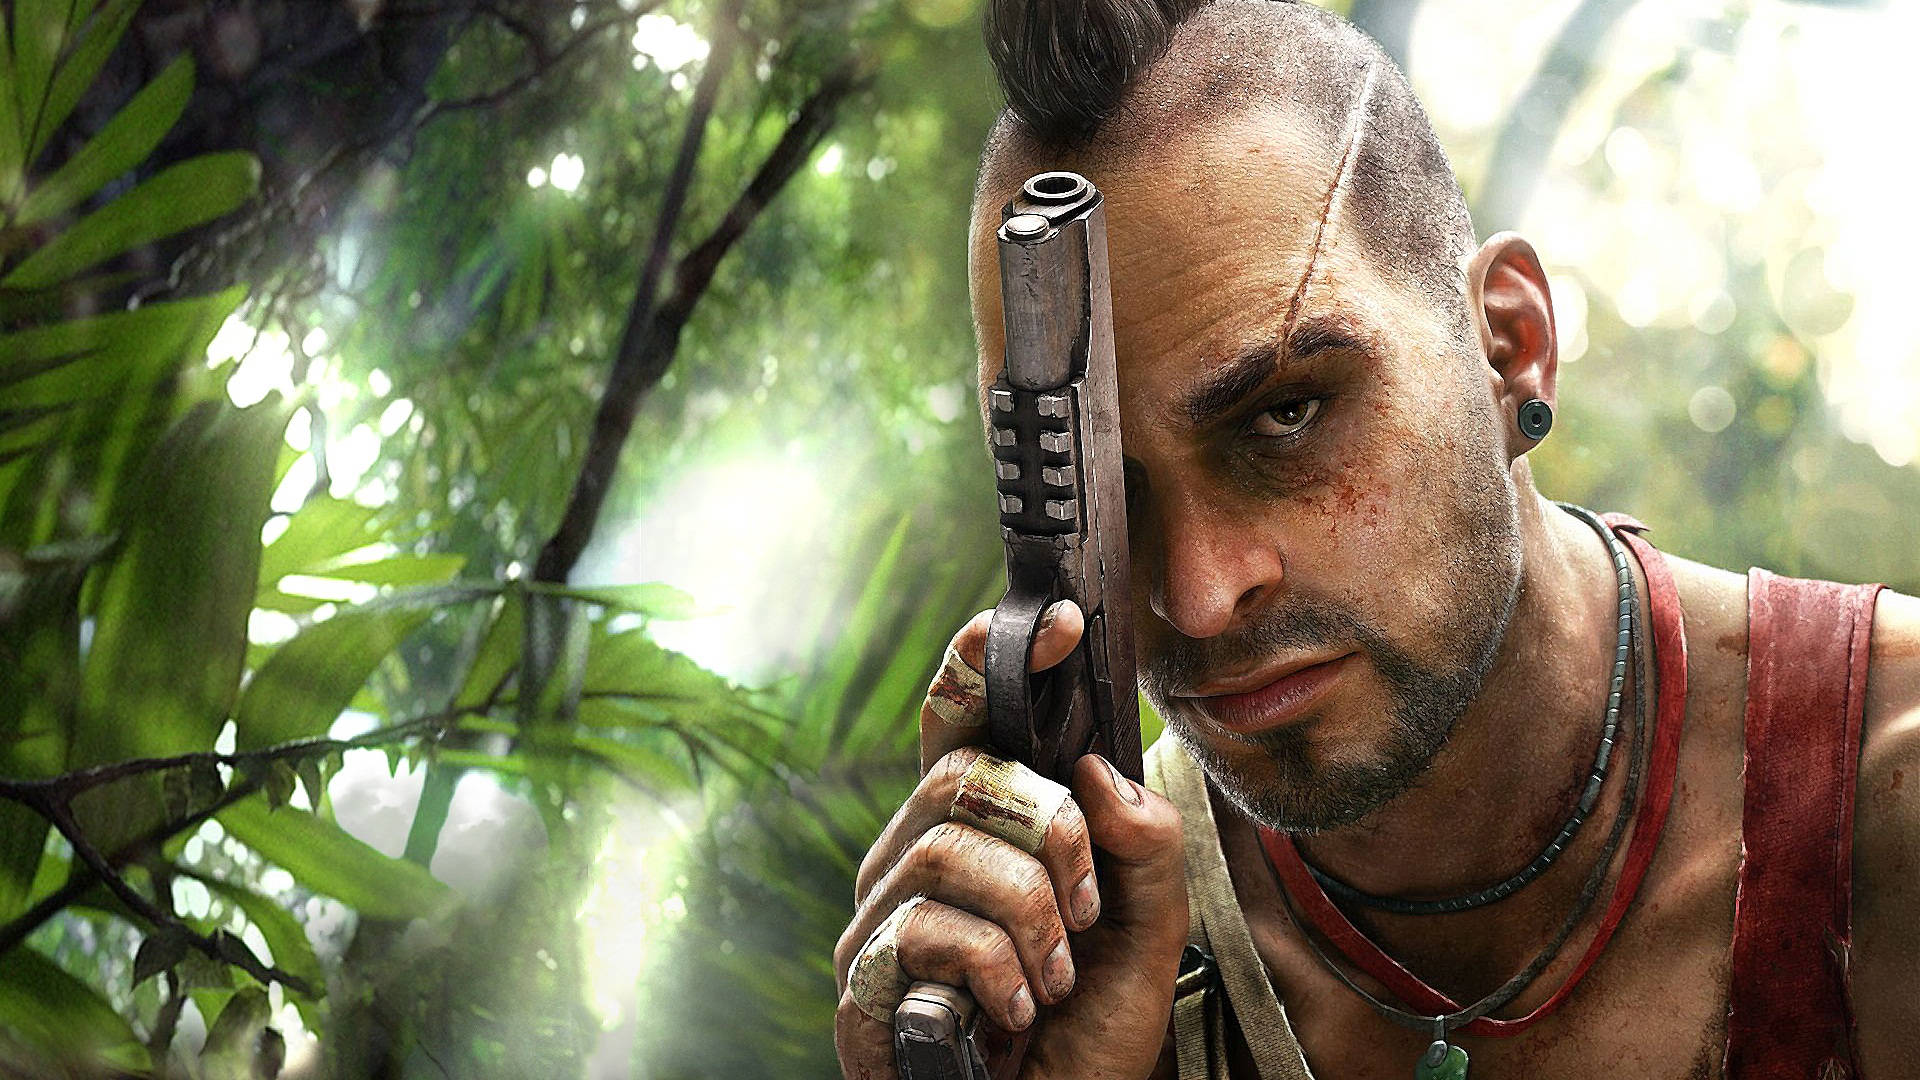 Far Cry 3 Vaas Montenegro In Jungle